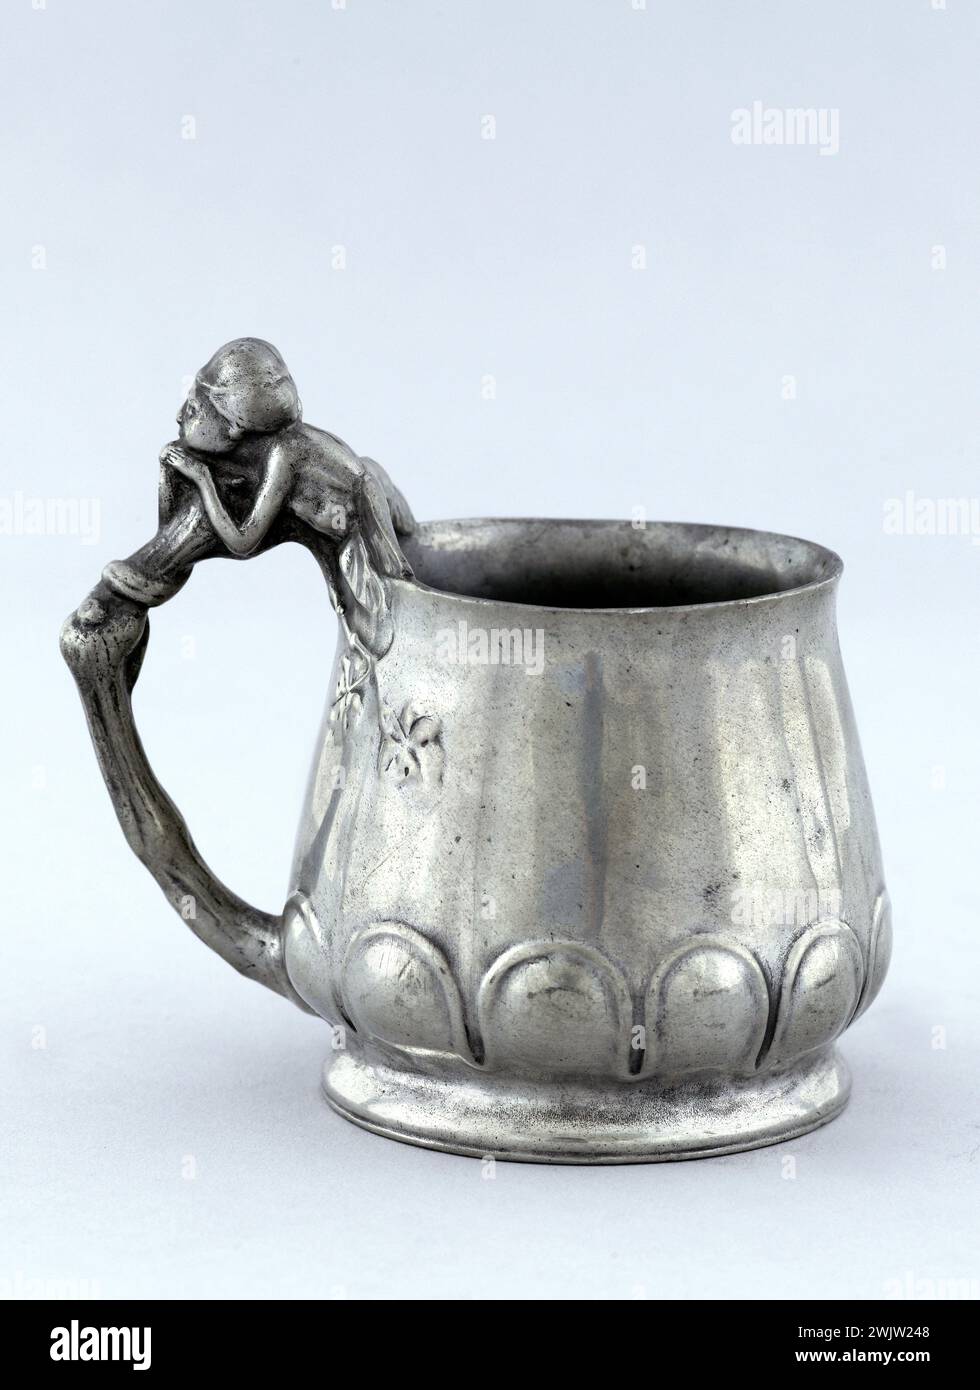 Jean Baffier (1851-1920). 'Cup'. Tin. 1899. Museum of Fine Arts of the City of Paris, Petit Palais. 57910-8 Anse, tin, goblet, wine service, dishes Stock Photo